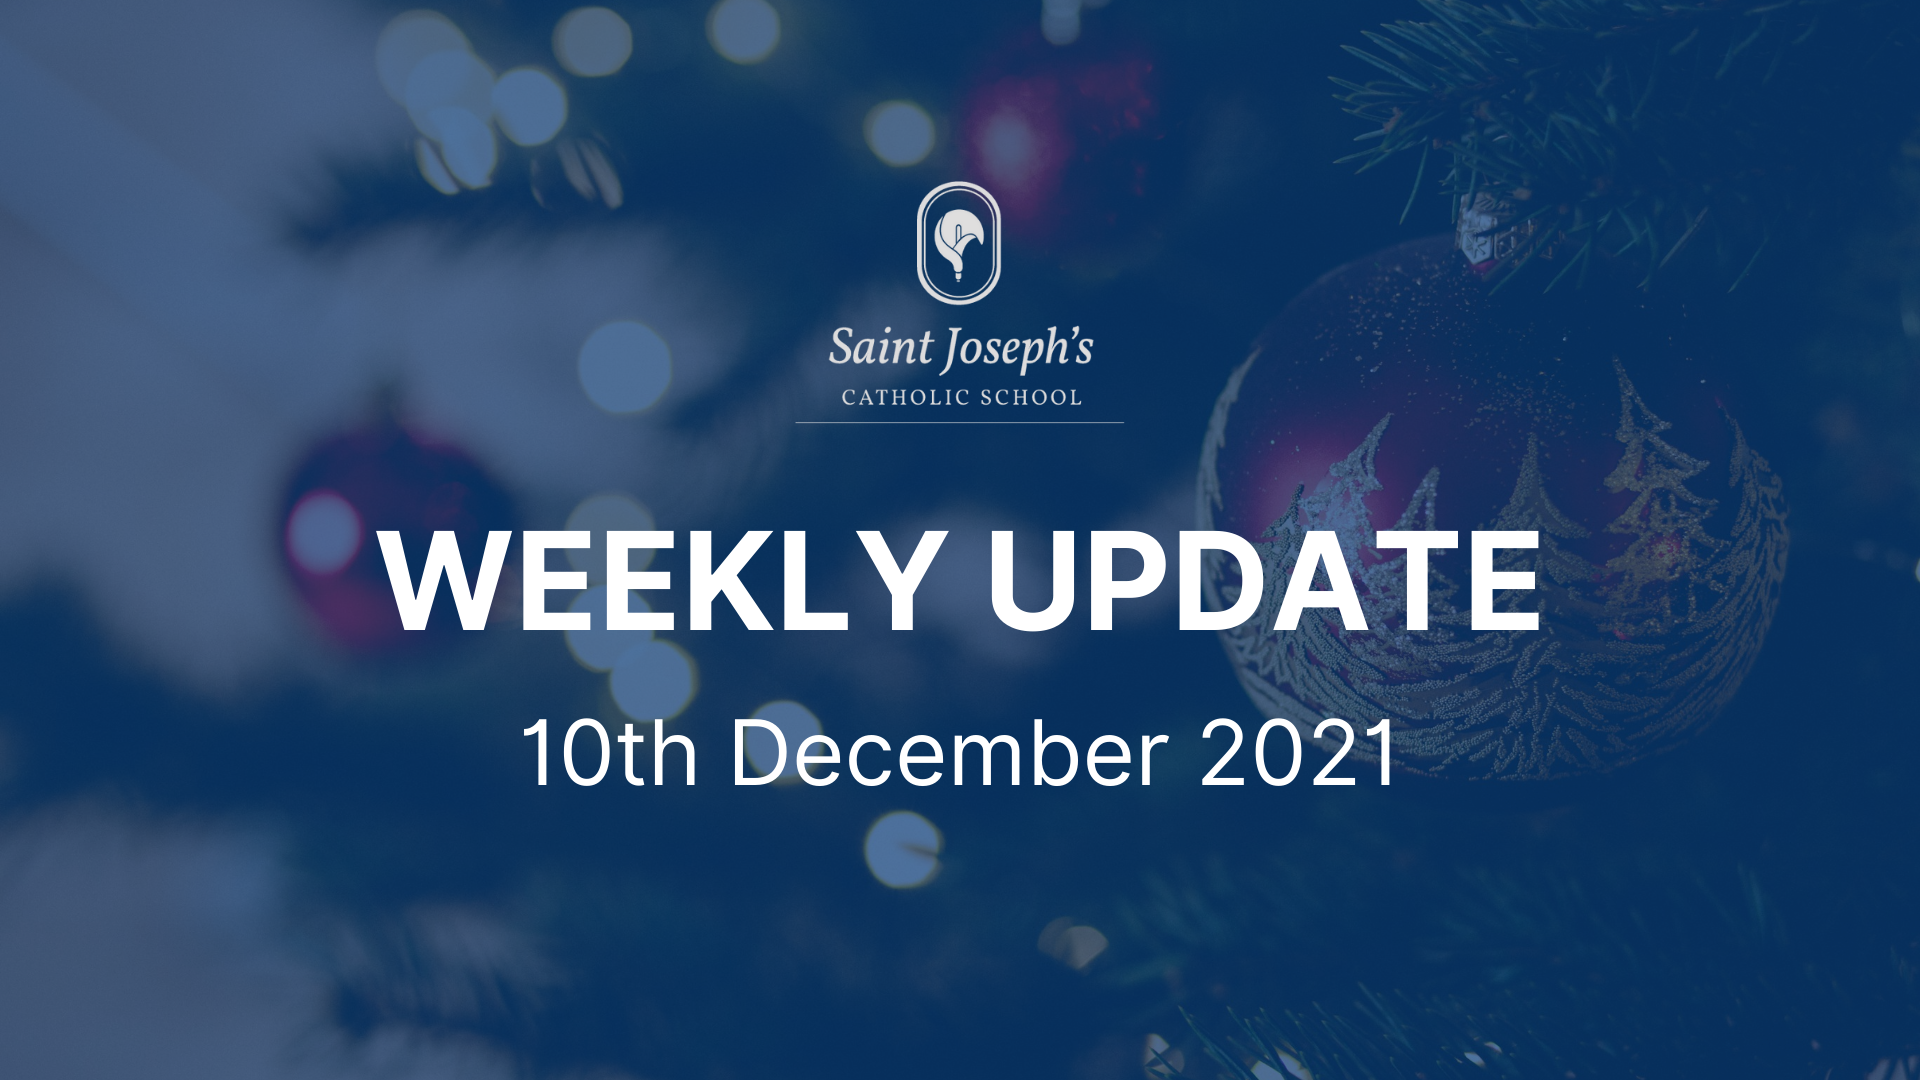 Featured image for “Weekly Update: 10th December 2021”